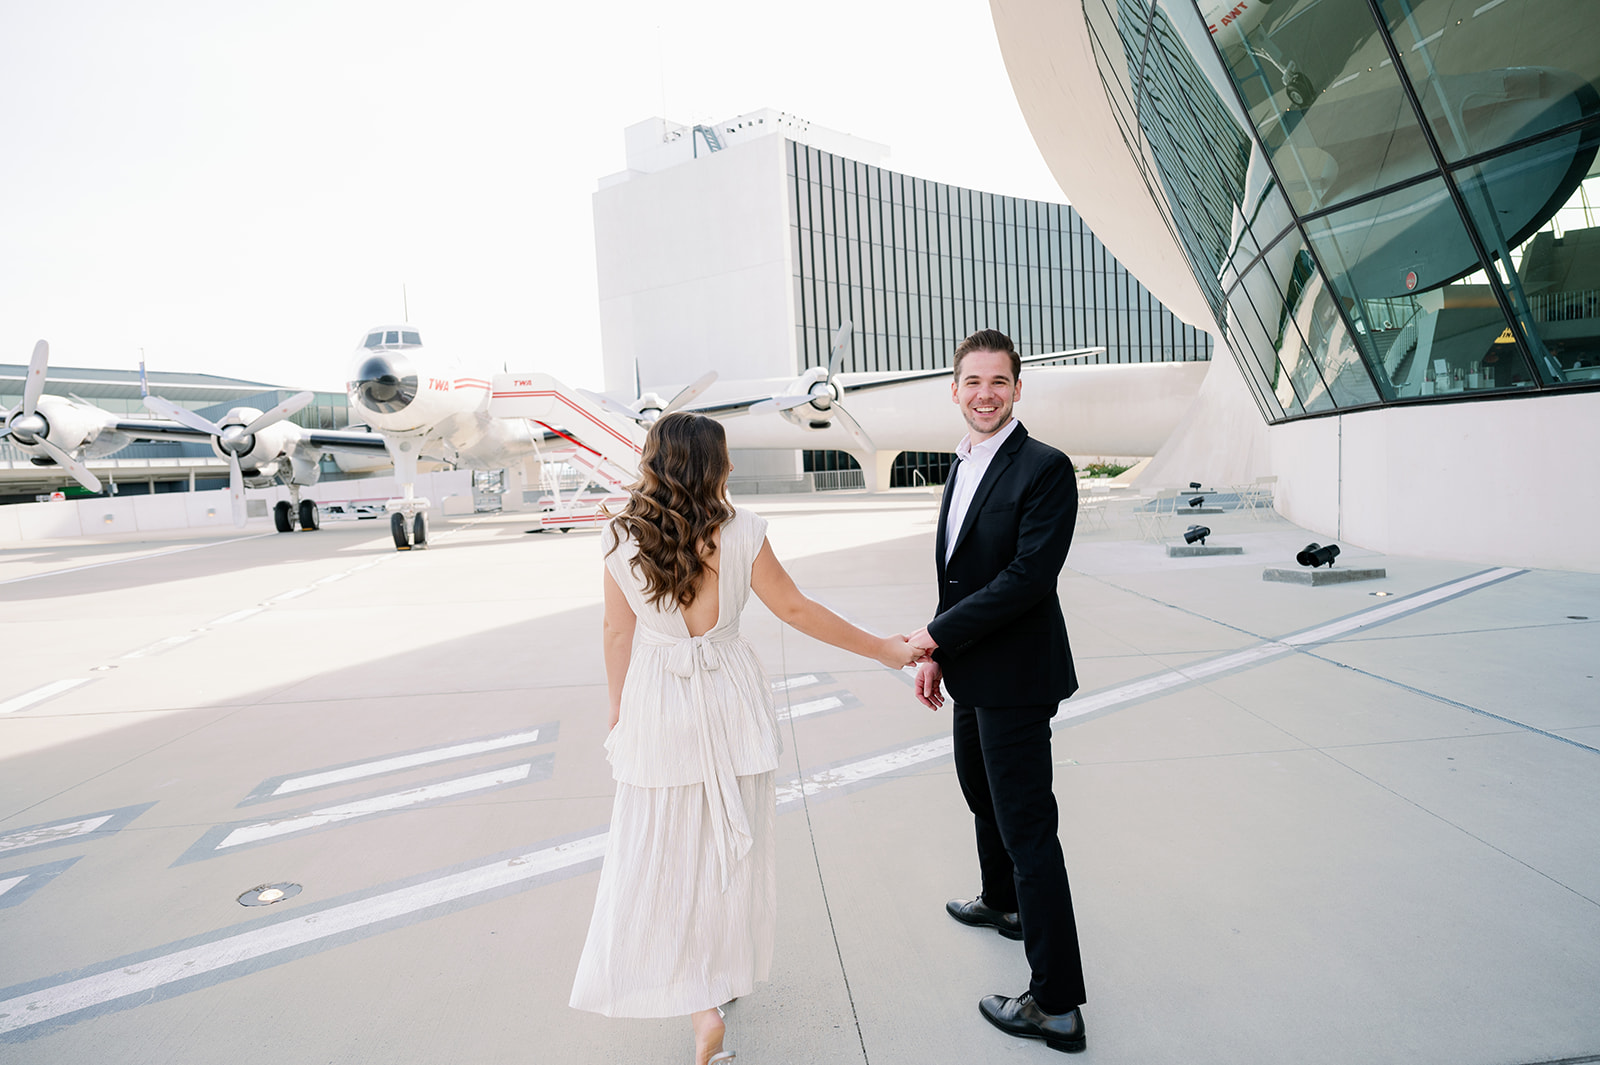 Engagement session on the tarmac at TWA Hotel.